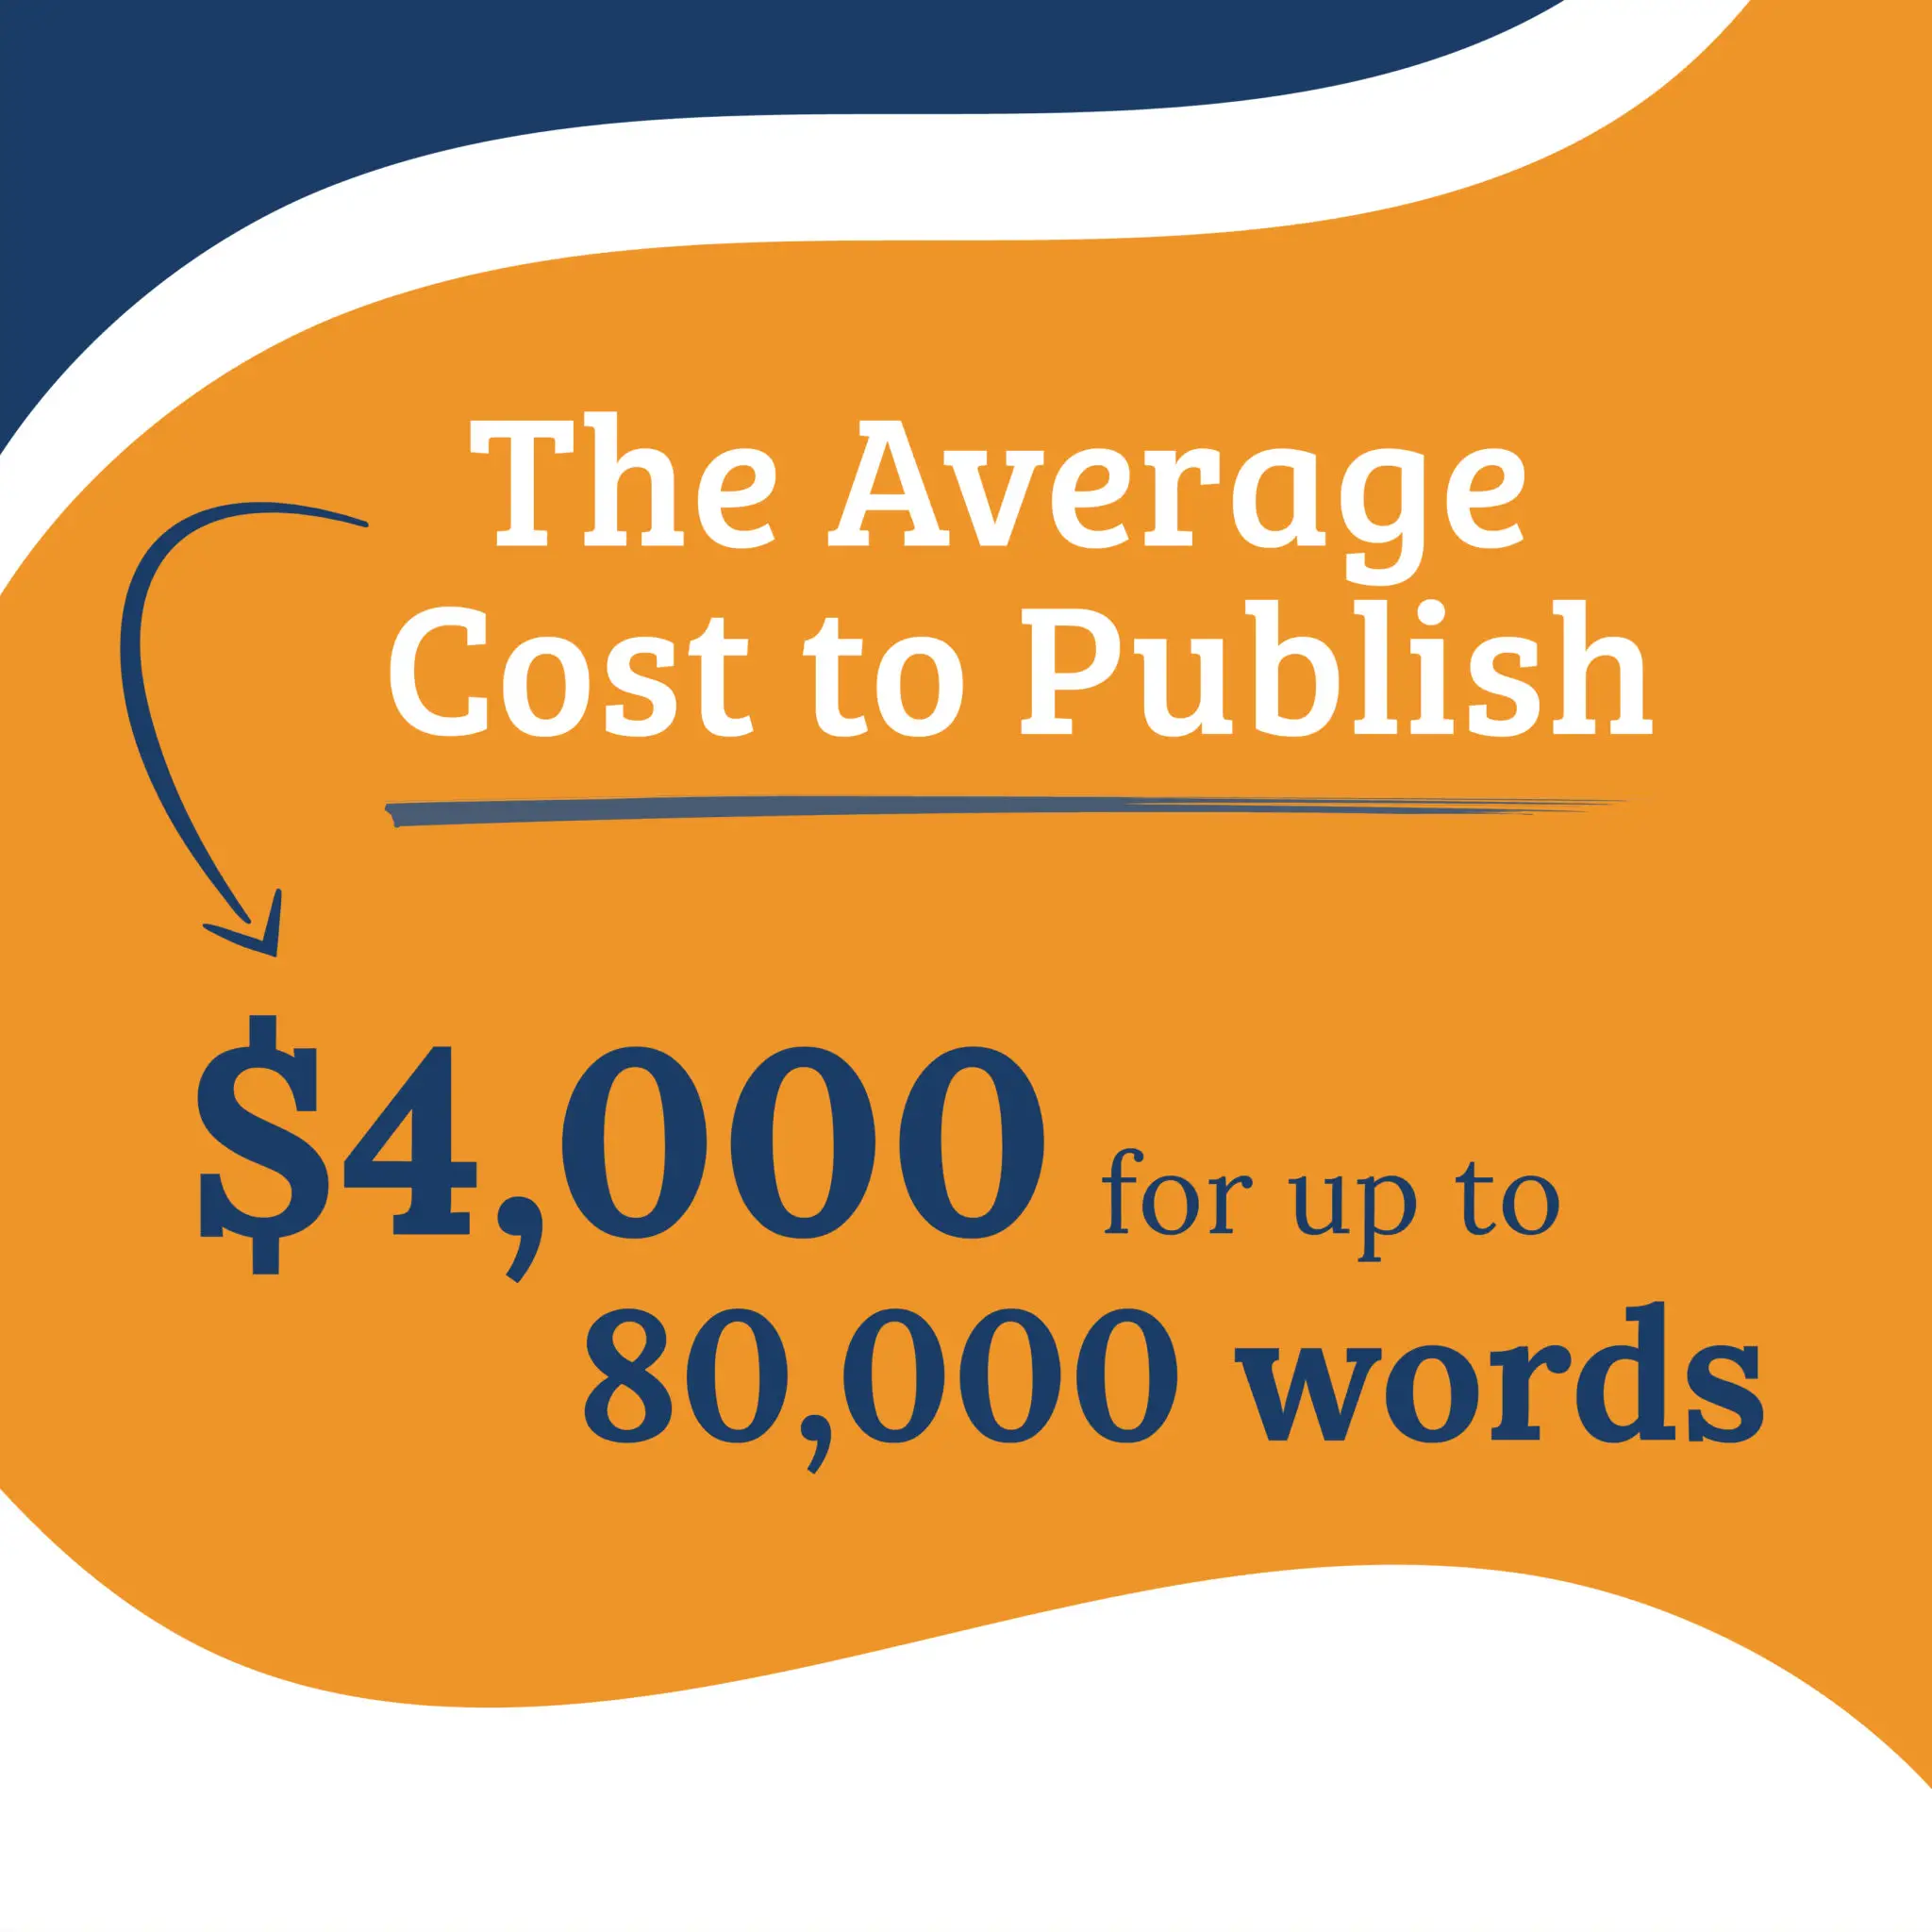 does it cost money to publish a research paper